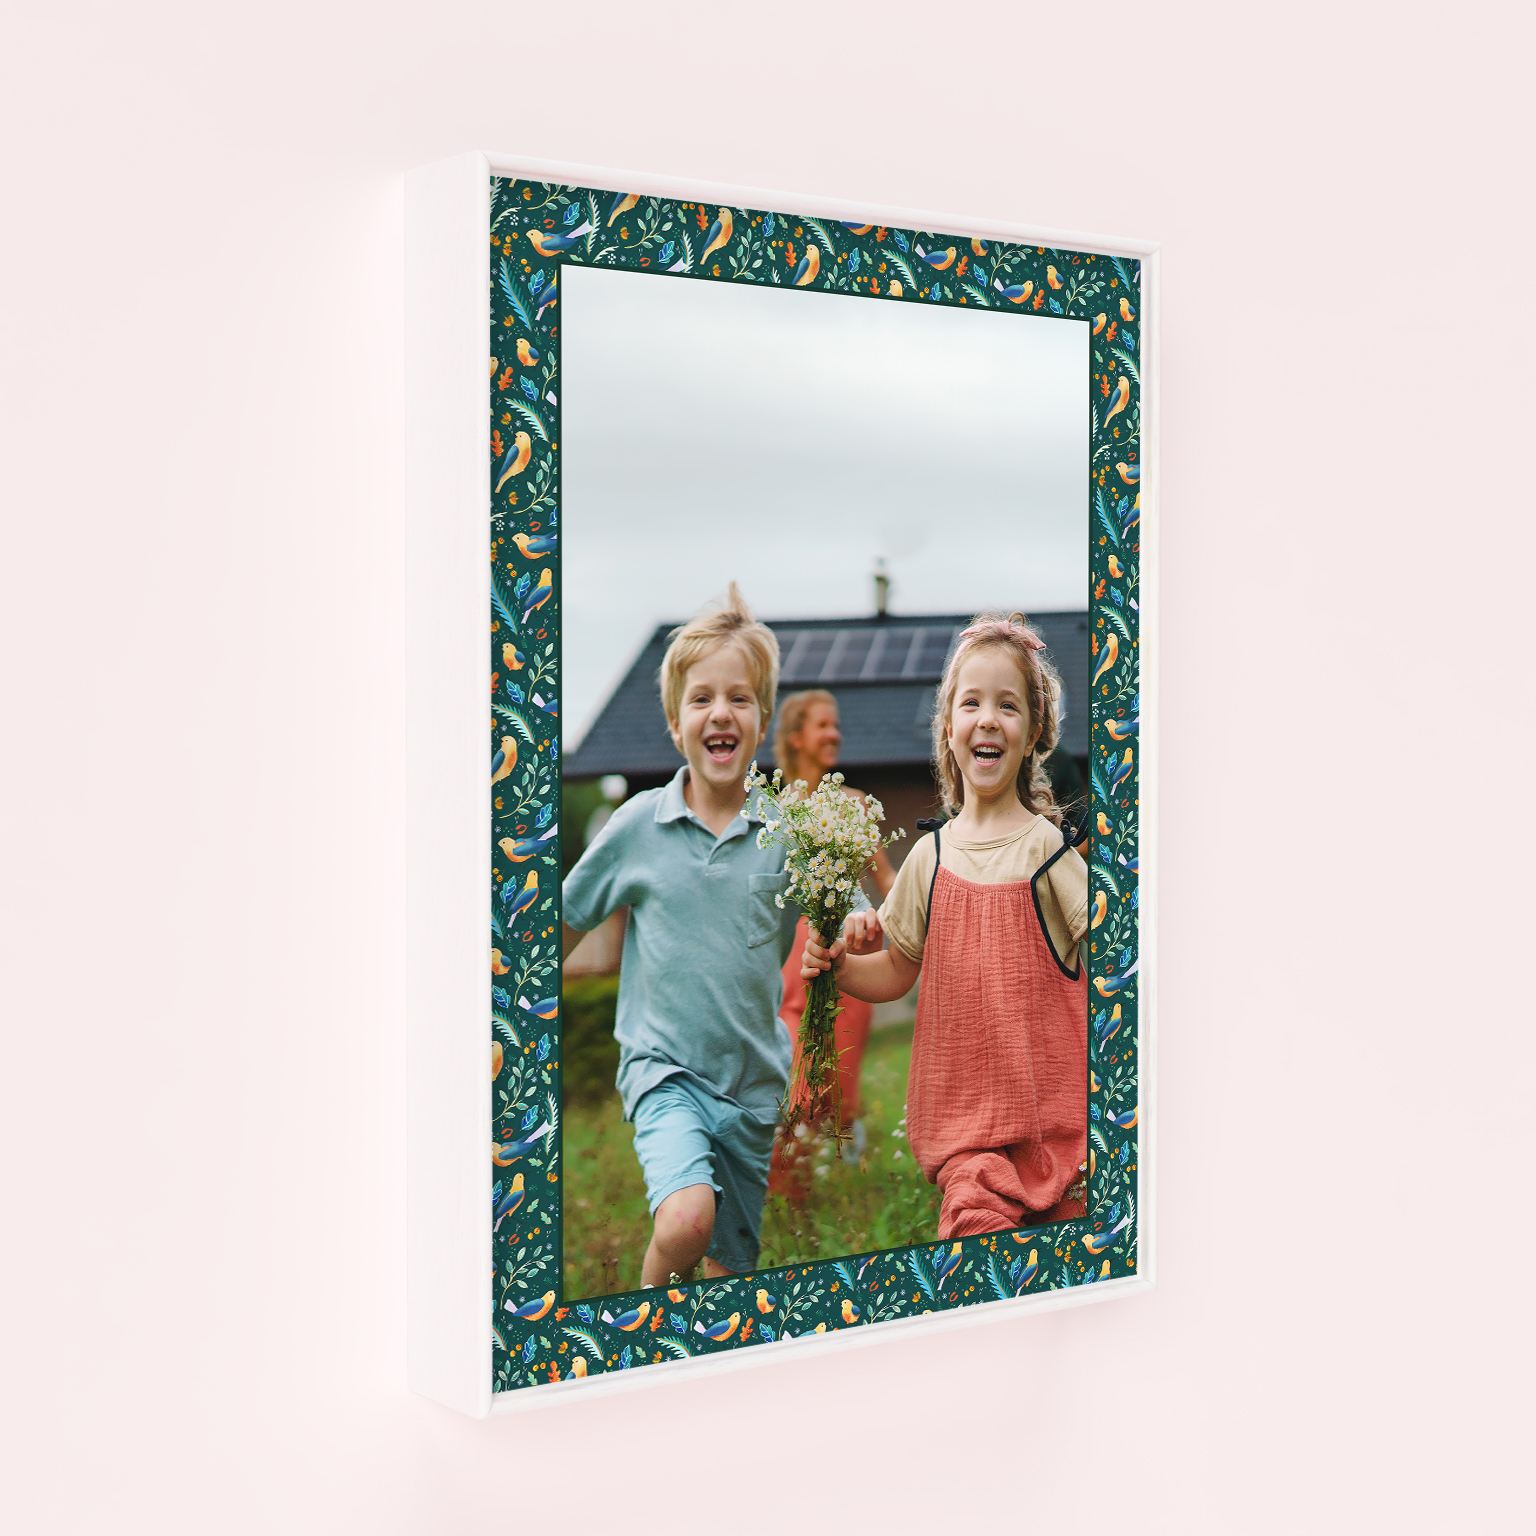 Heritage Portrait Wall Art Framed Print - Premium Crafted Masterpiece for Cherished Memories